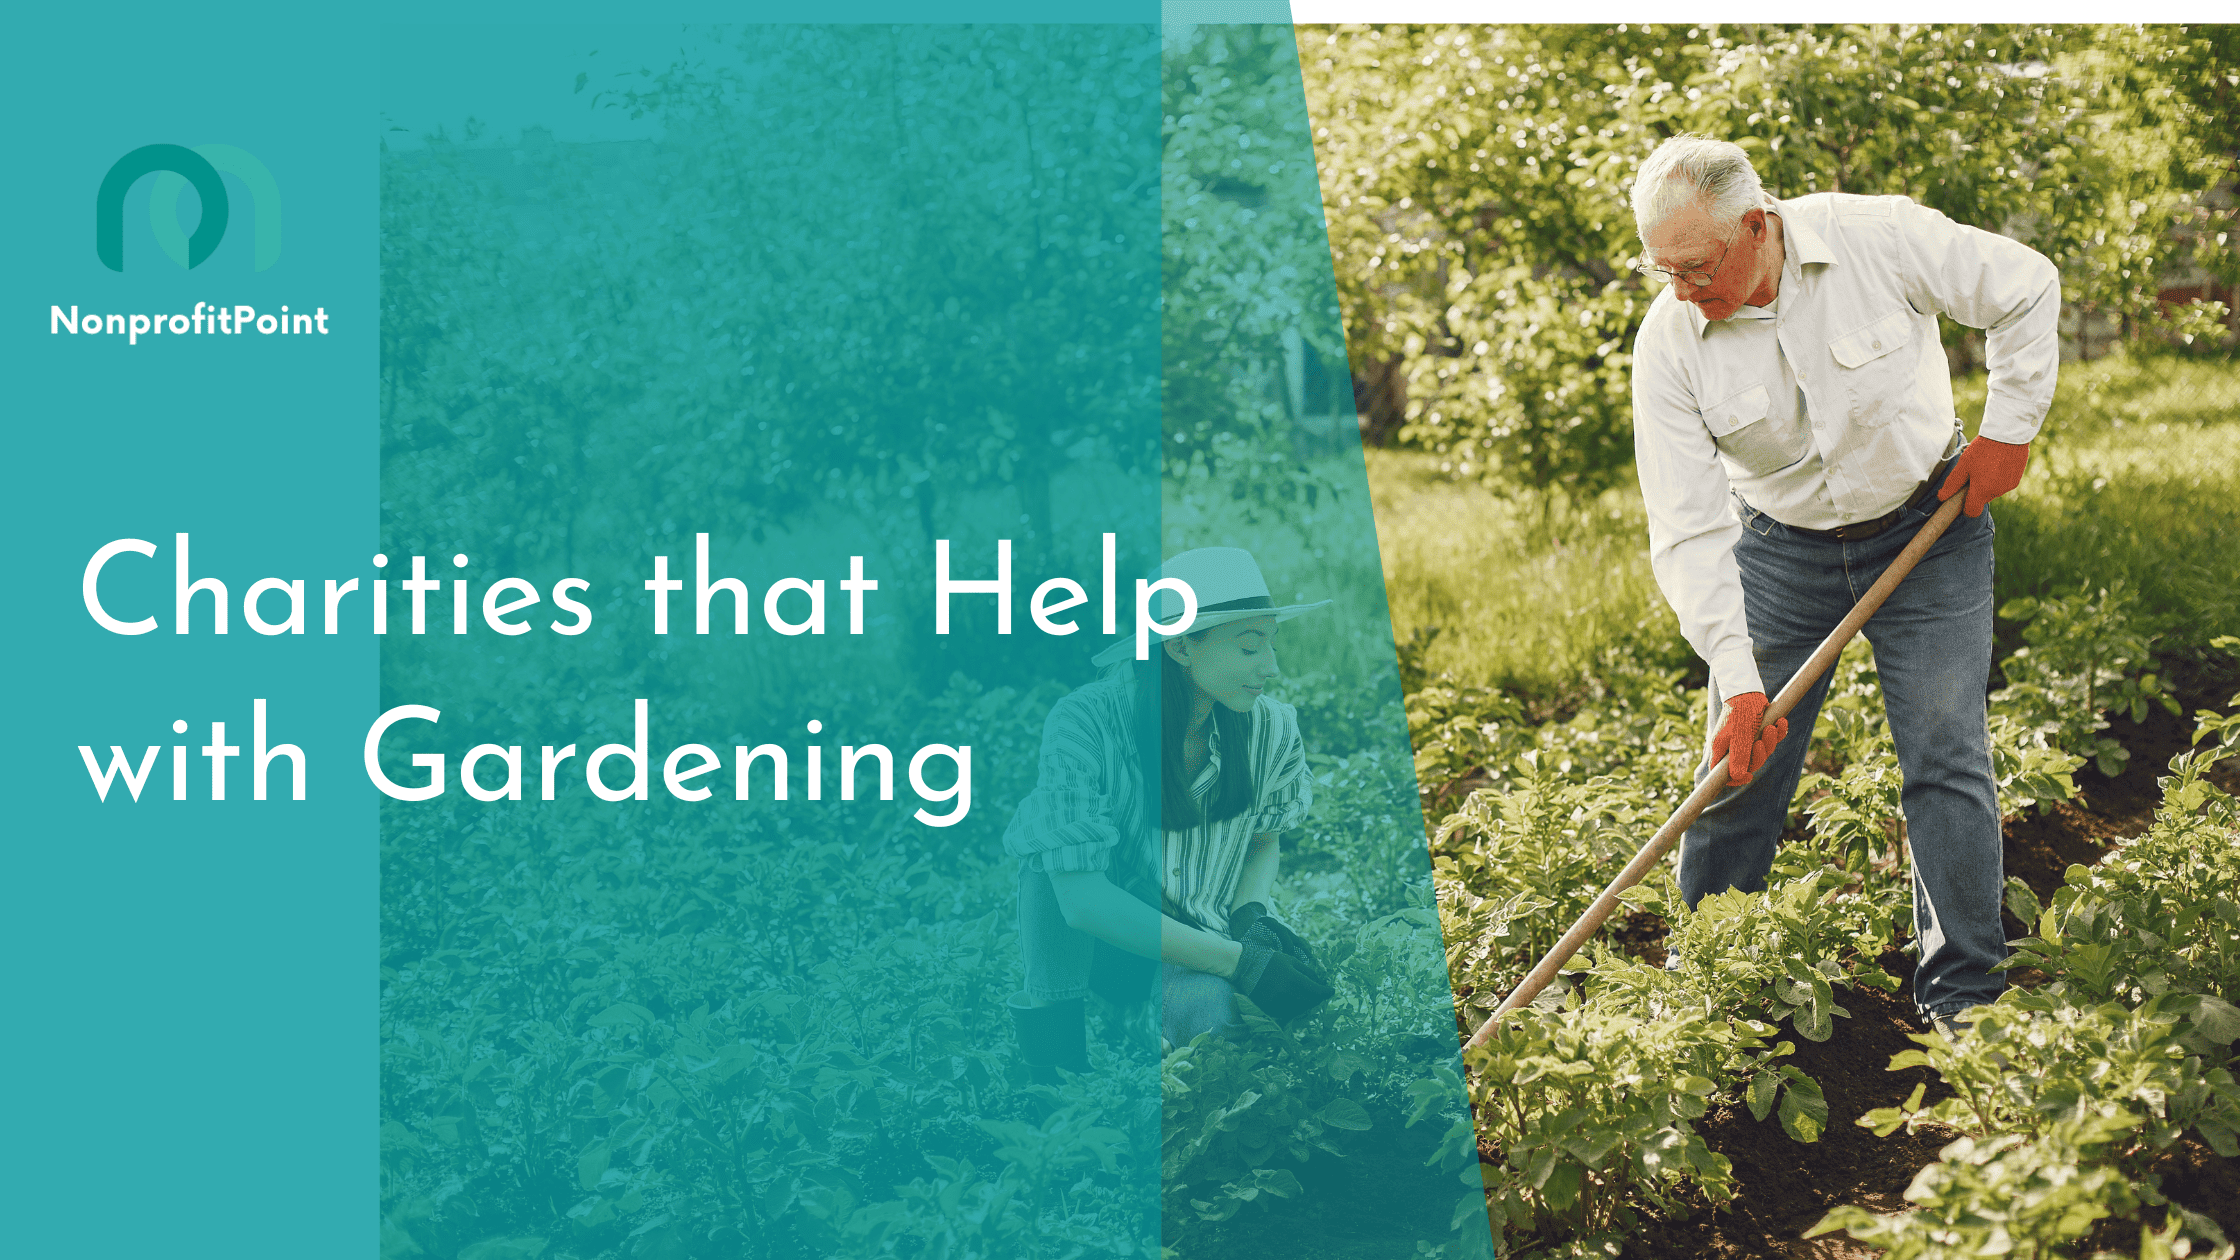 Charities that Help with Gardening